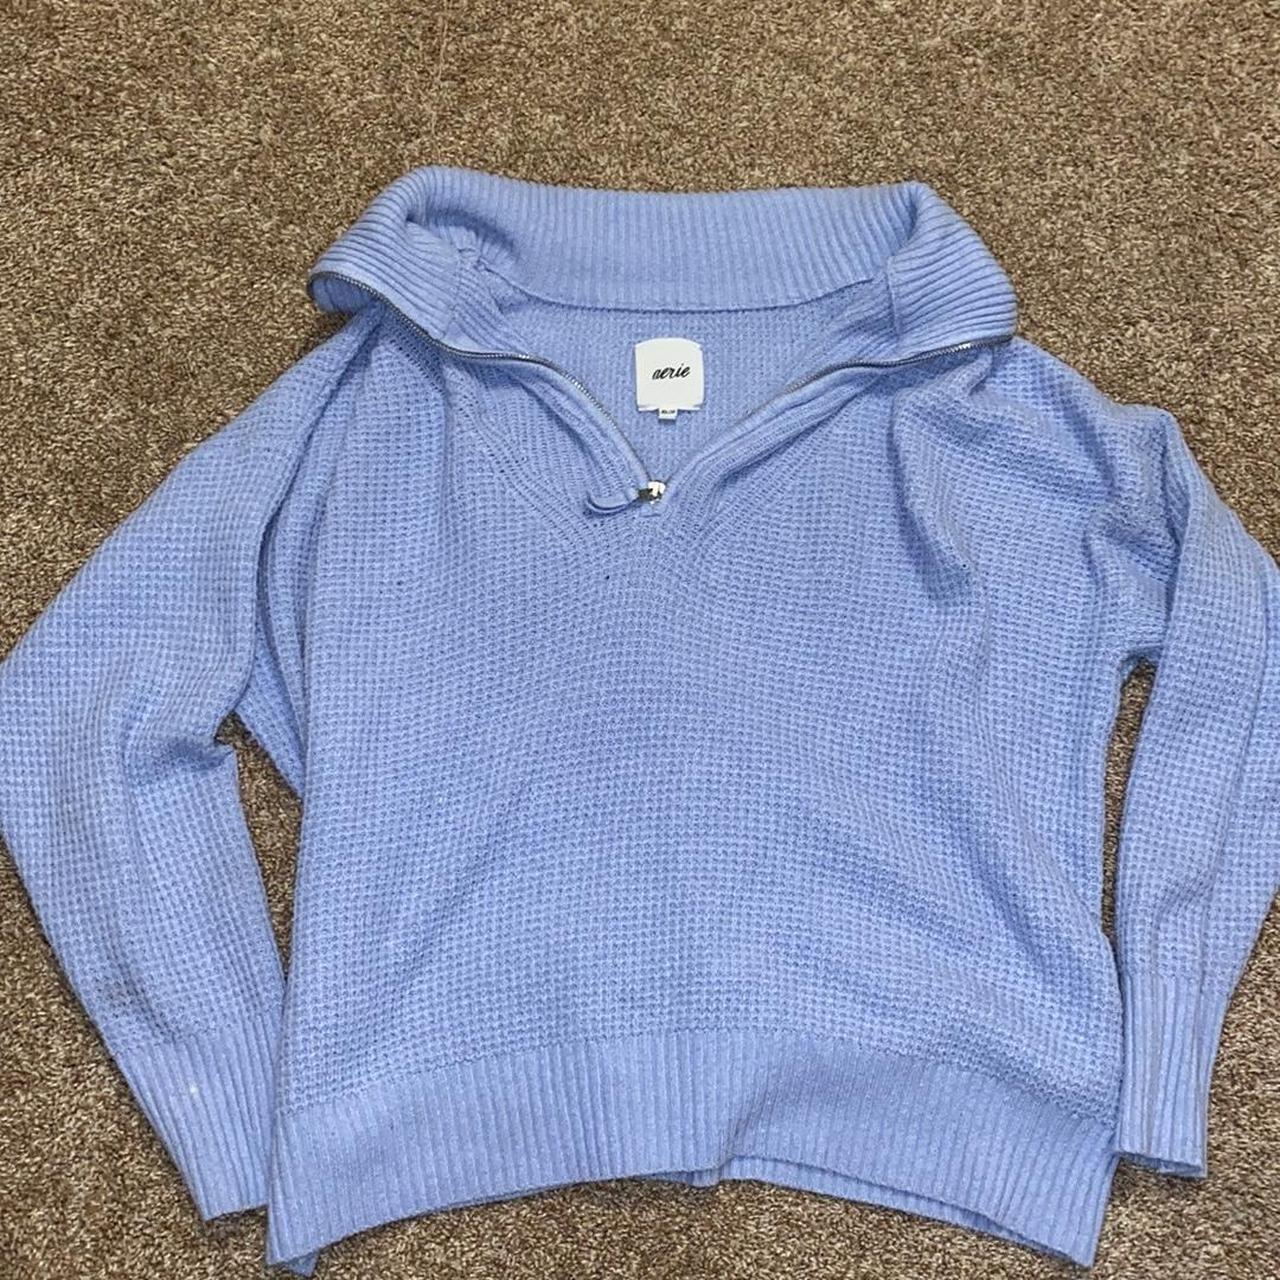 Aerie by American Eagle. Periwinkle colored - Depop